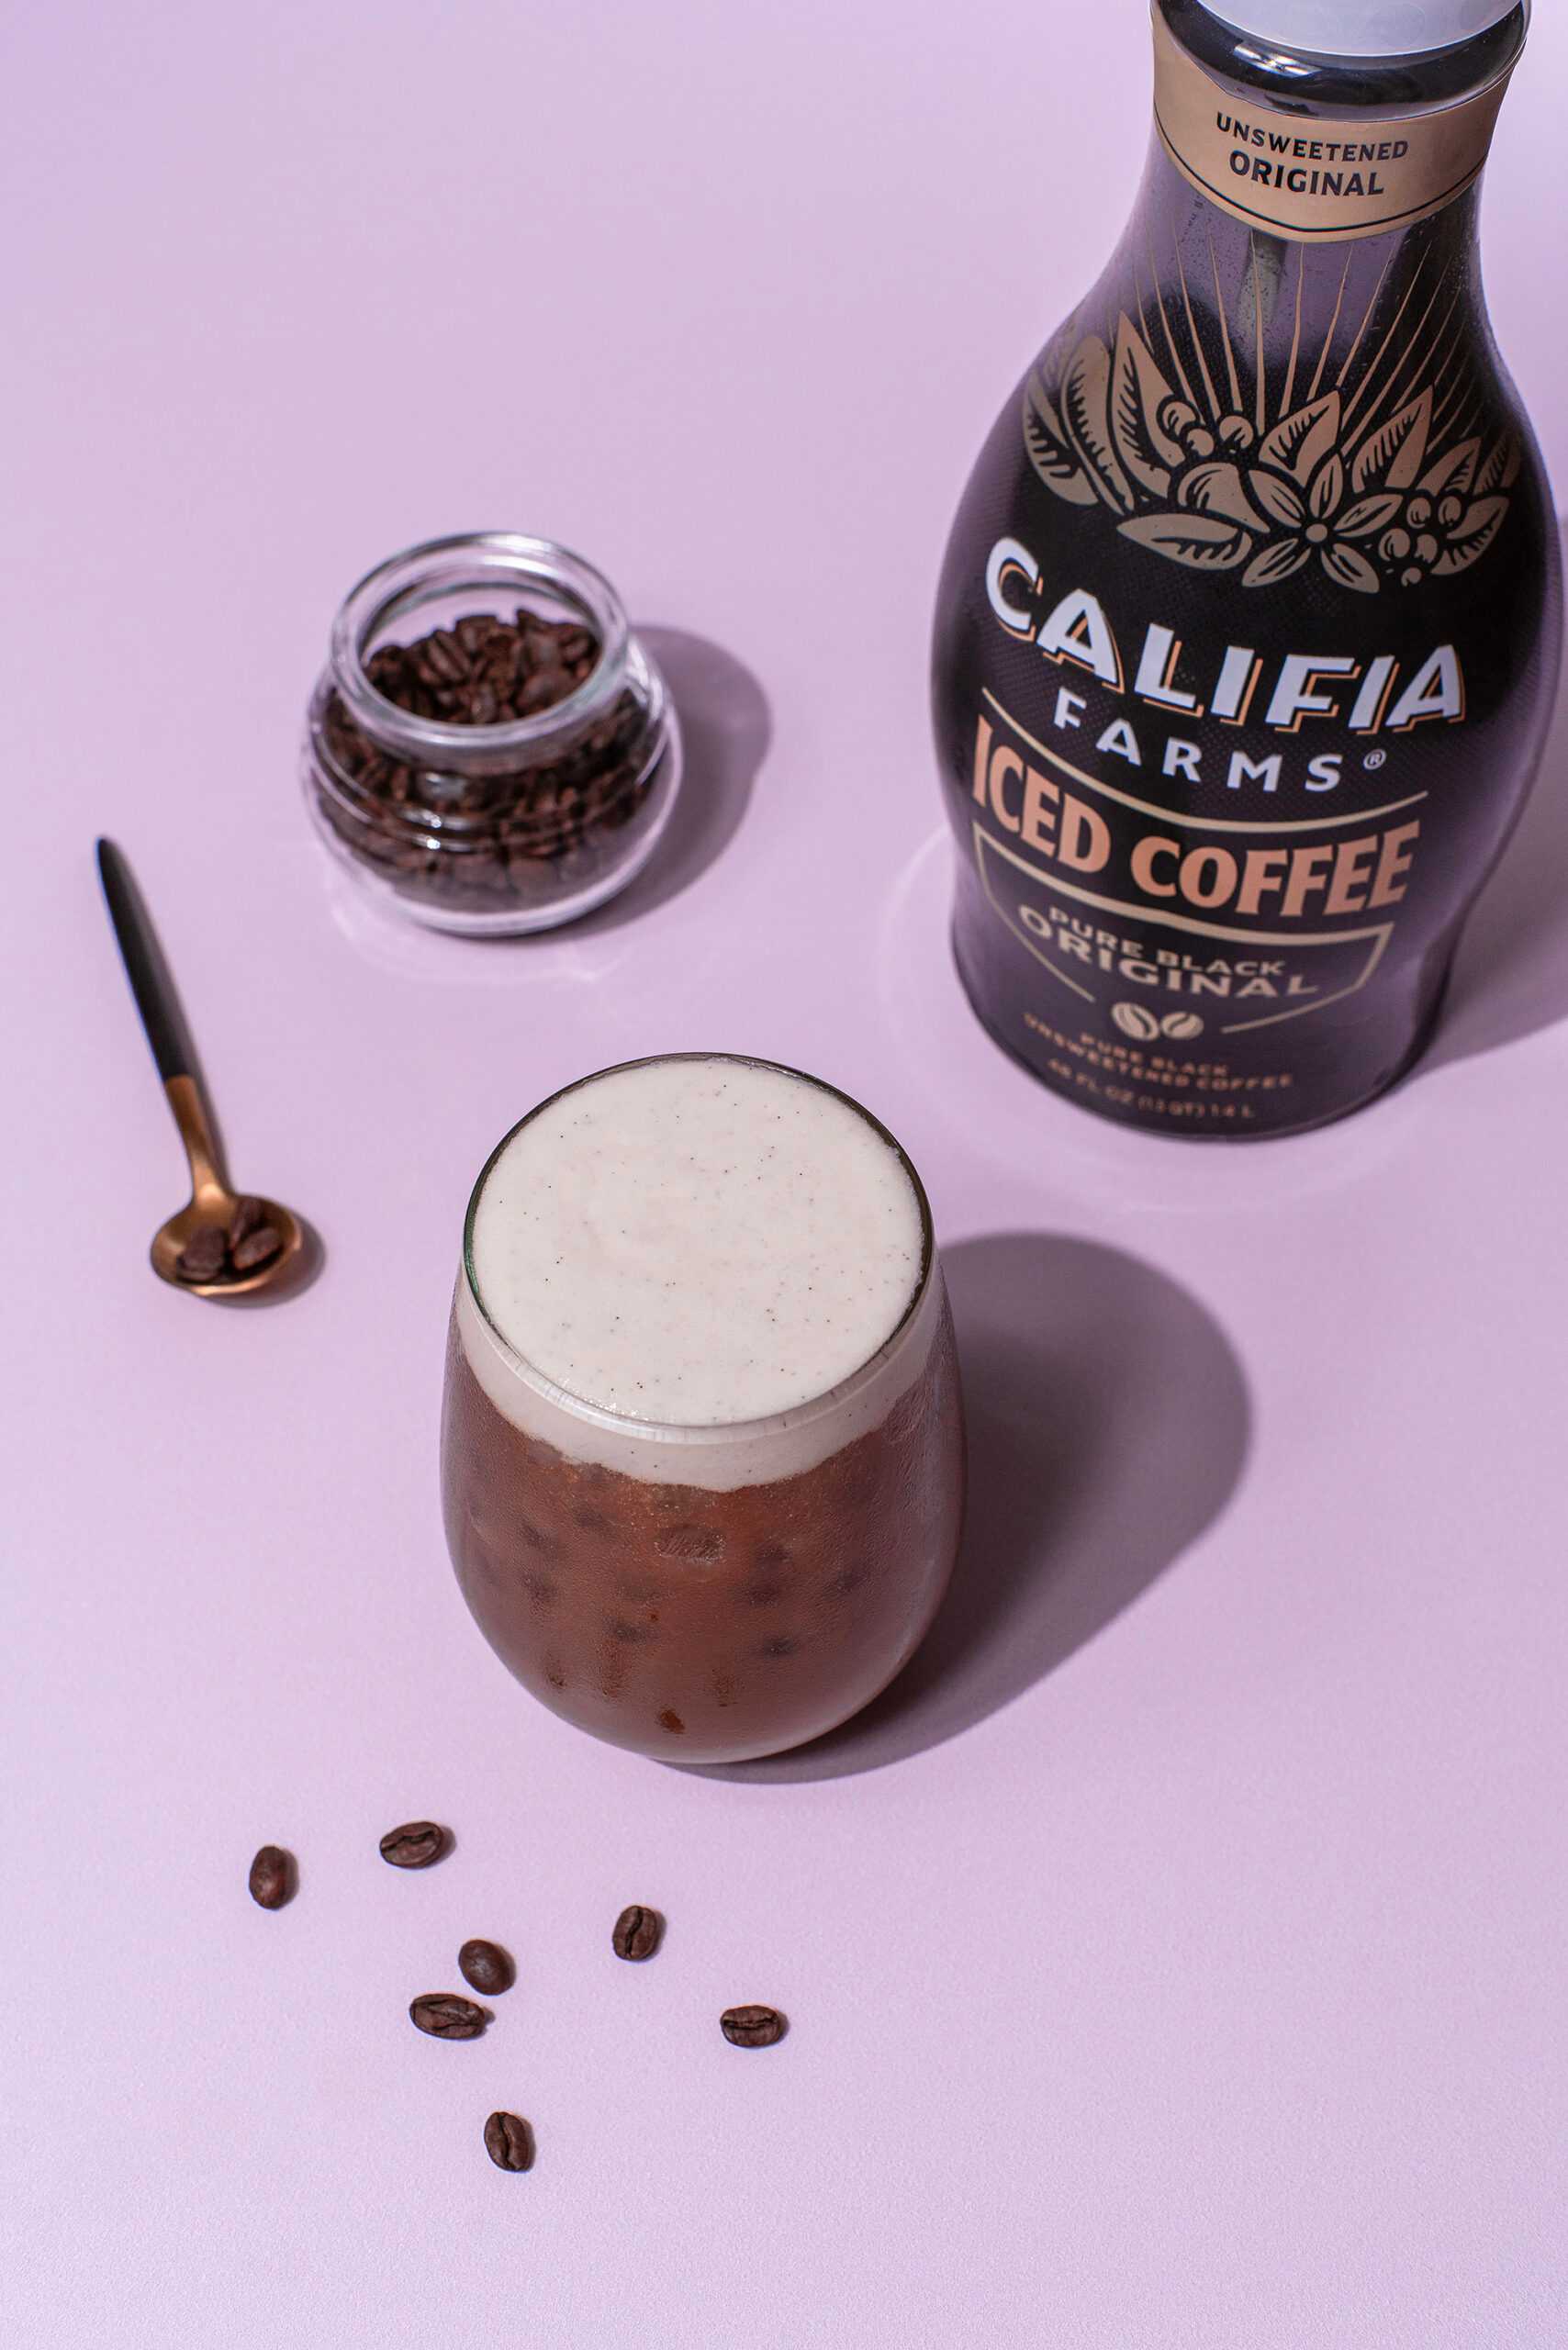 A sparkling iced coffee drink sits at the center of the image with Califia Farms Iced Coffee in the background.